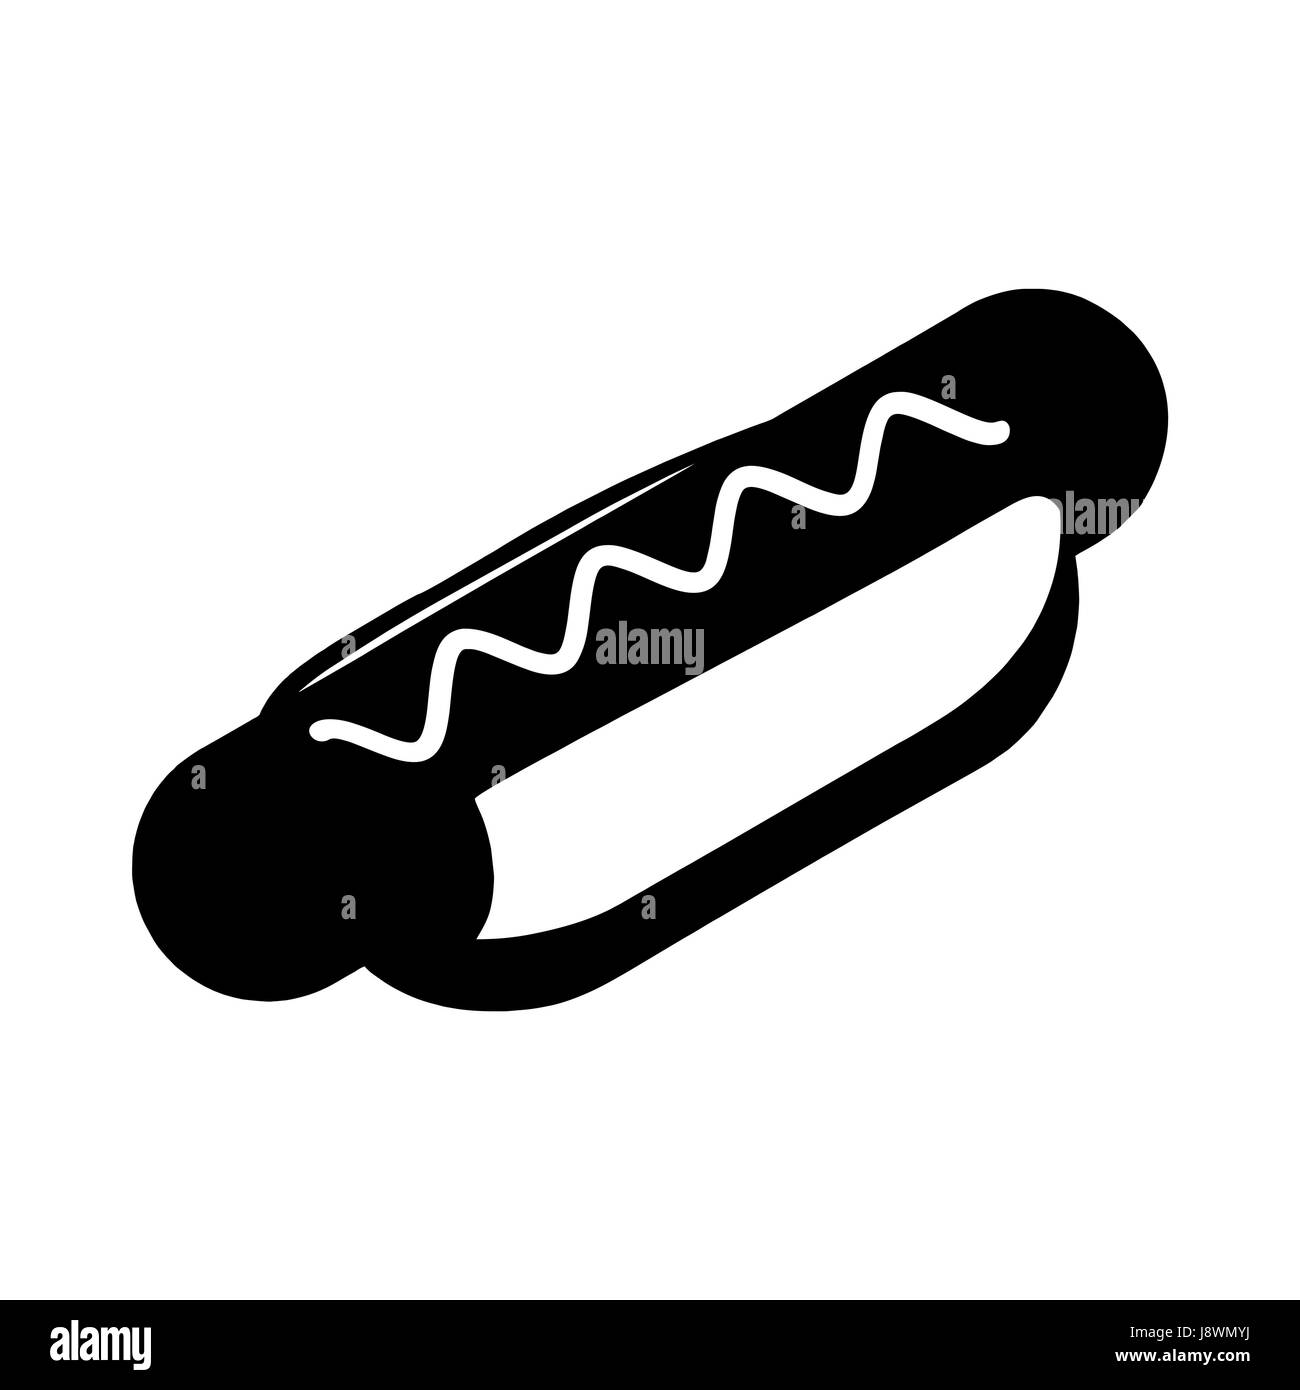 Hot dog silhouette. Fast food in flat style icon. Bun and sausage Stock Vector